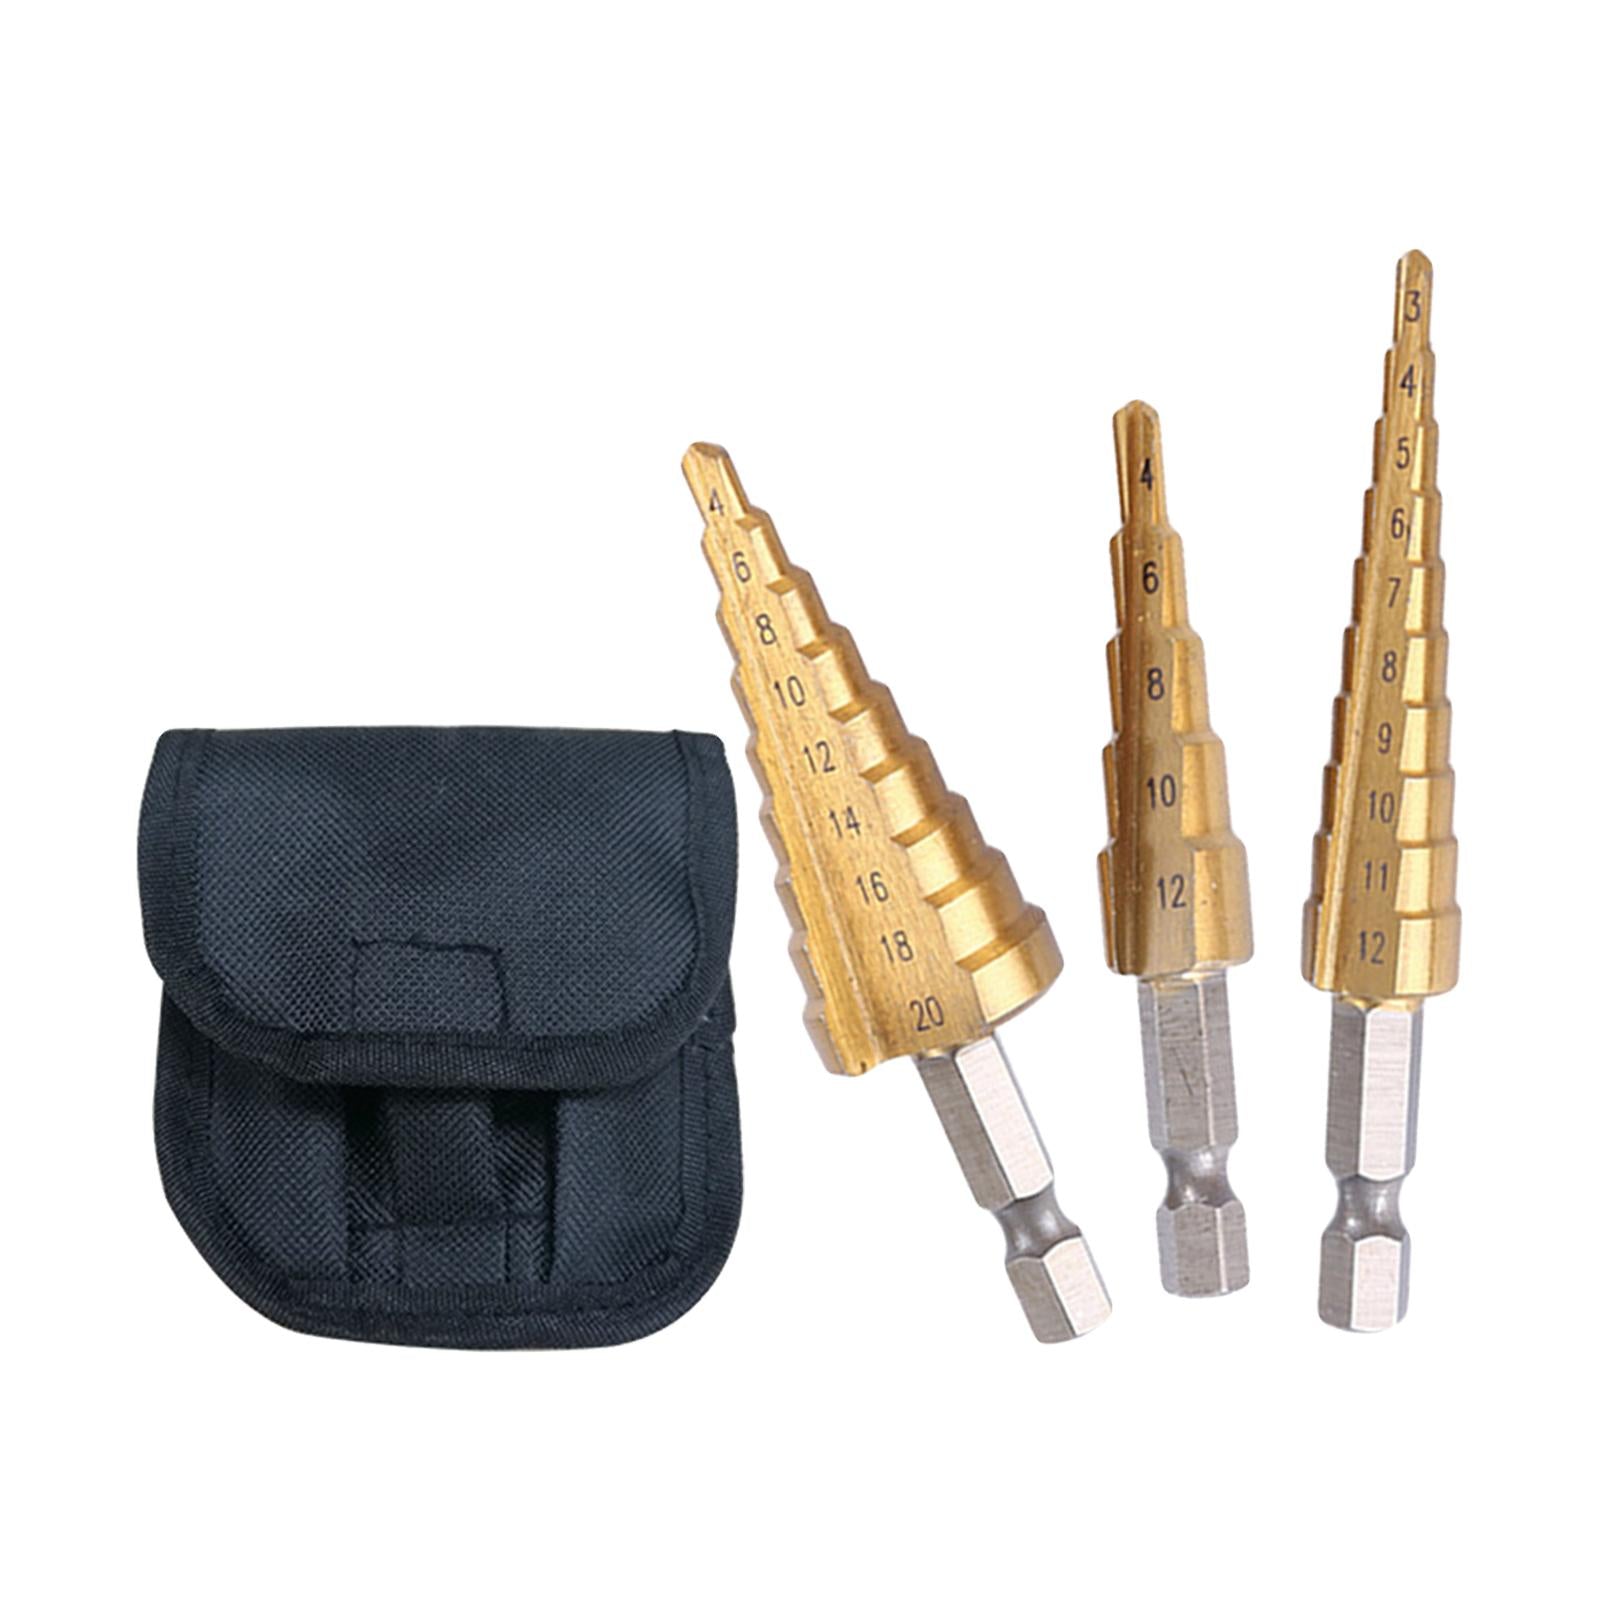 Drilling Step Drill Bit for Stainless Steel Metal 3pcs 3-12 4-12  4-20